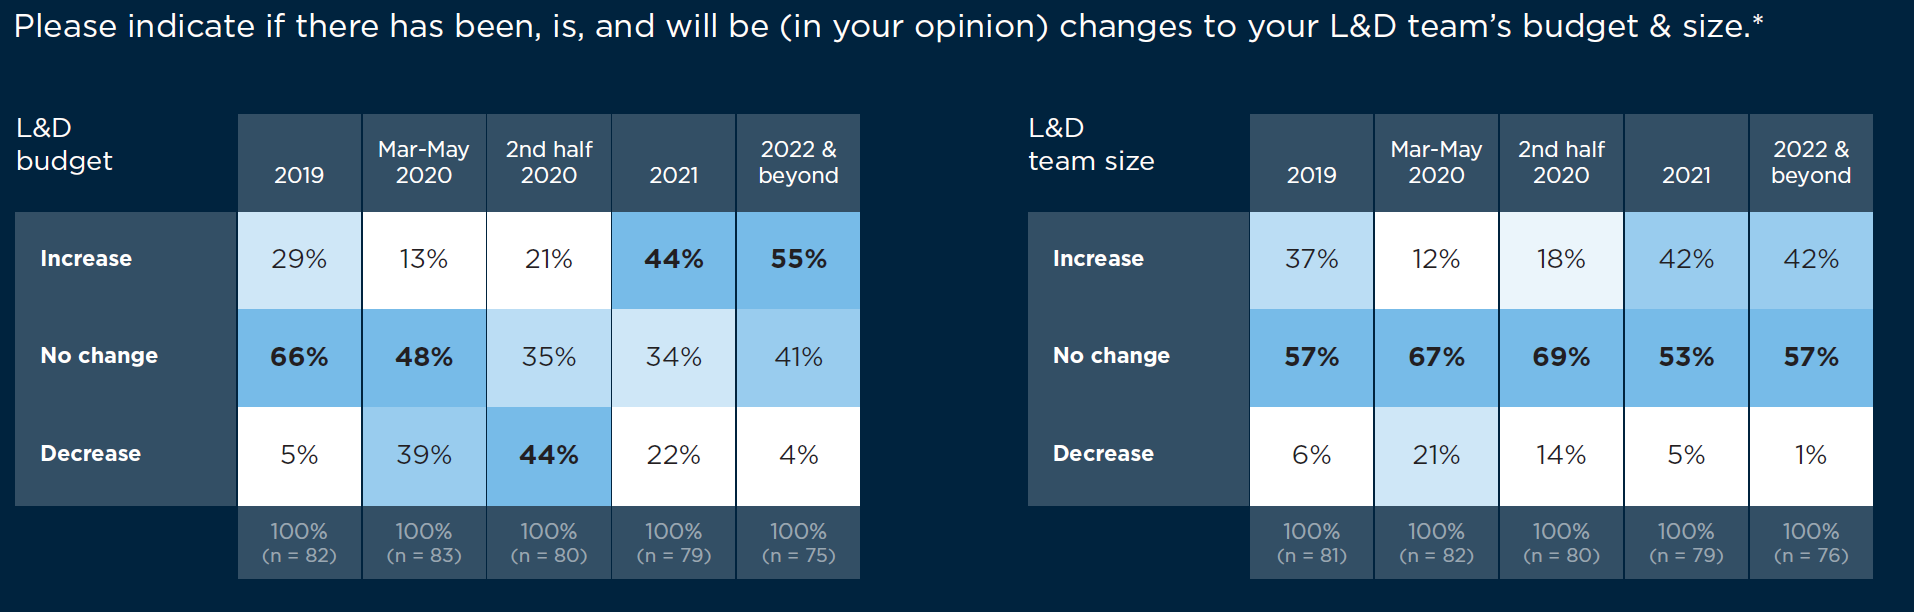 L&D budgets and headcount are expected to rise beginning in 2021